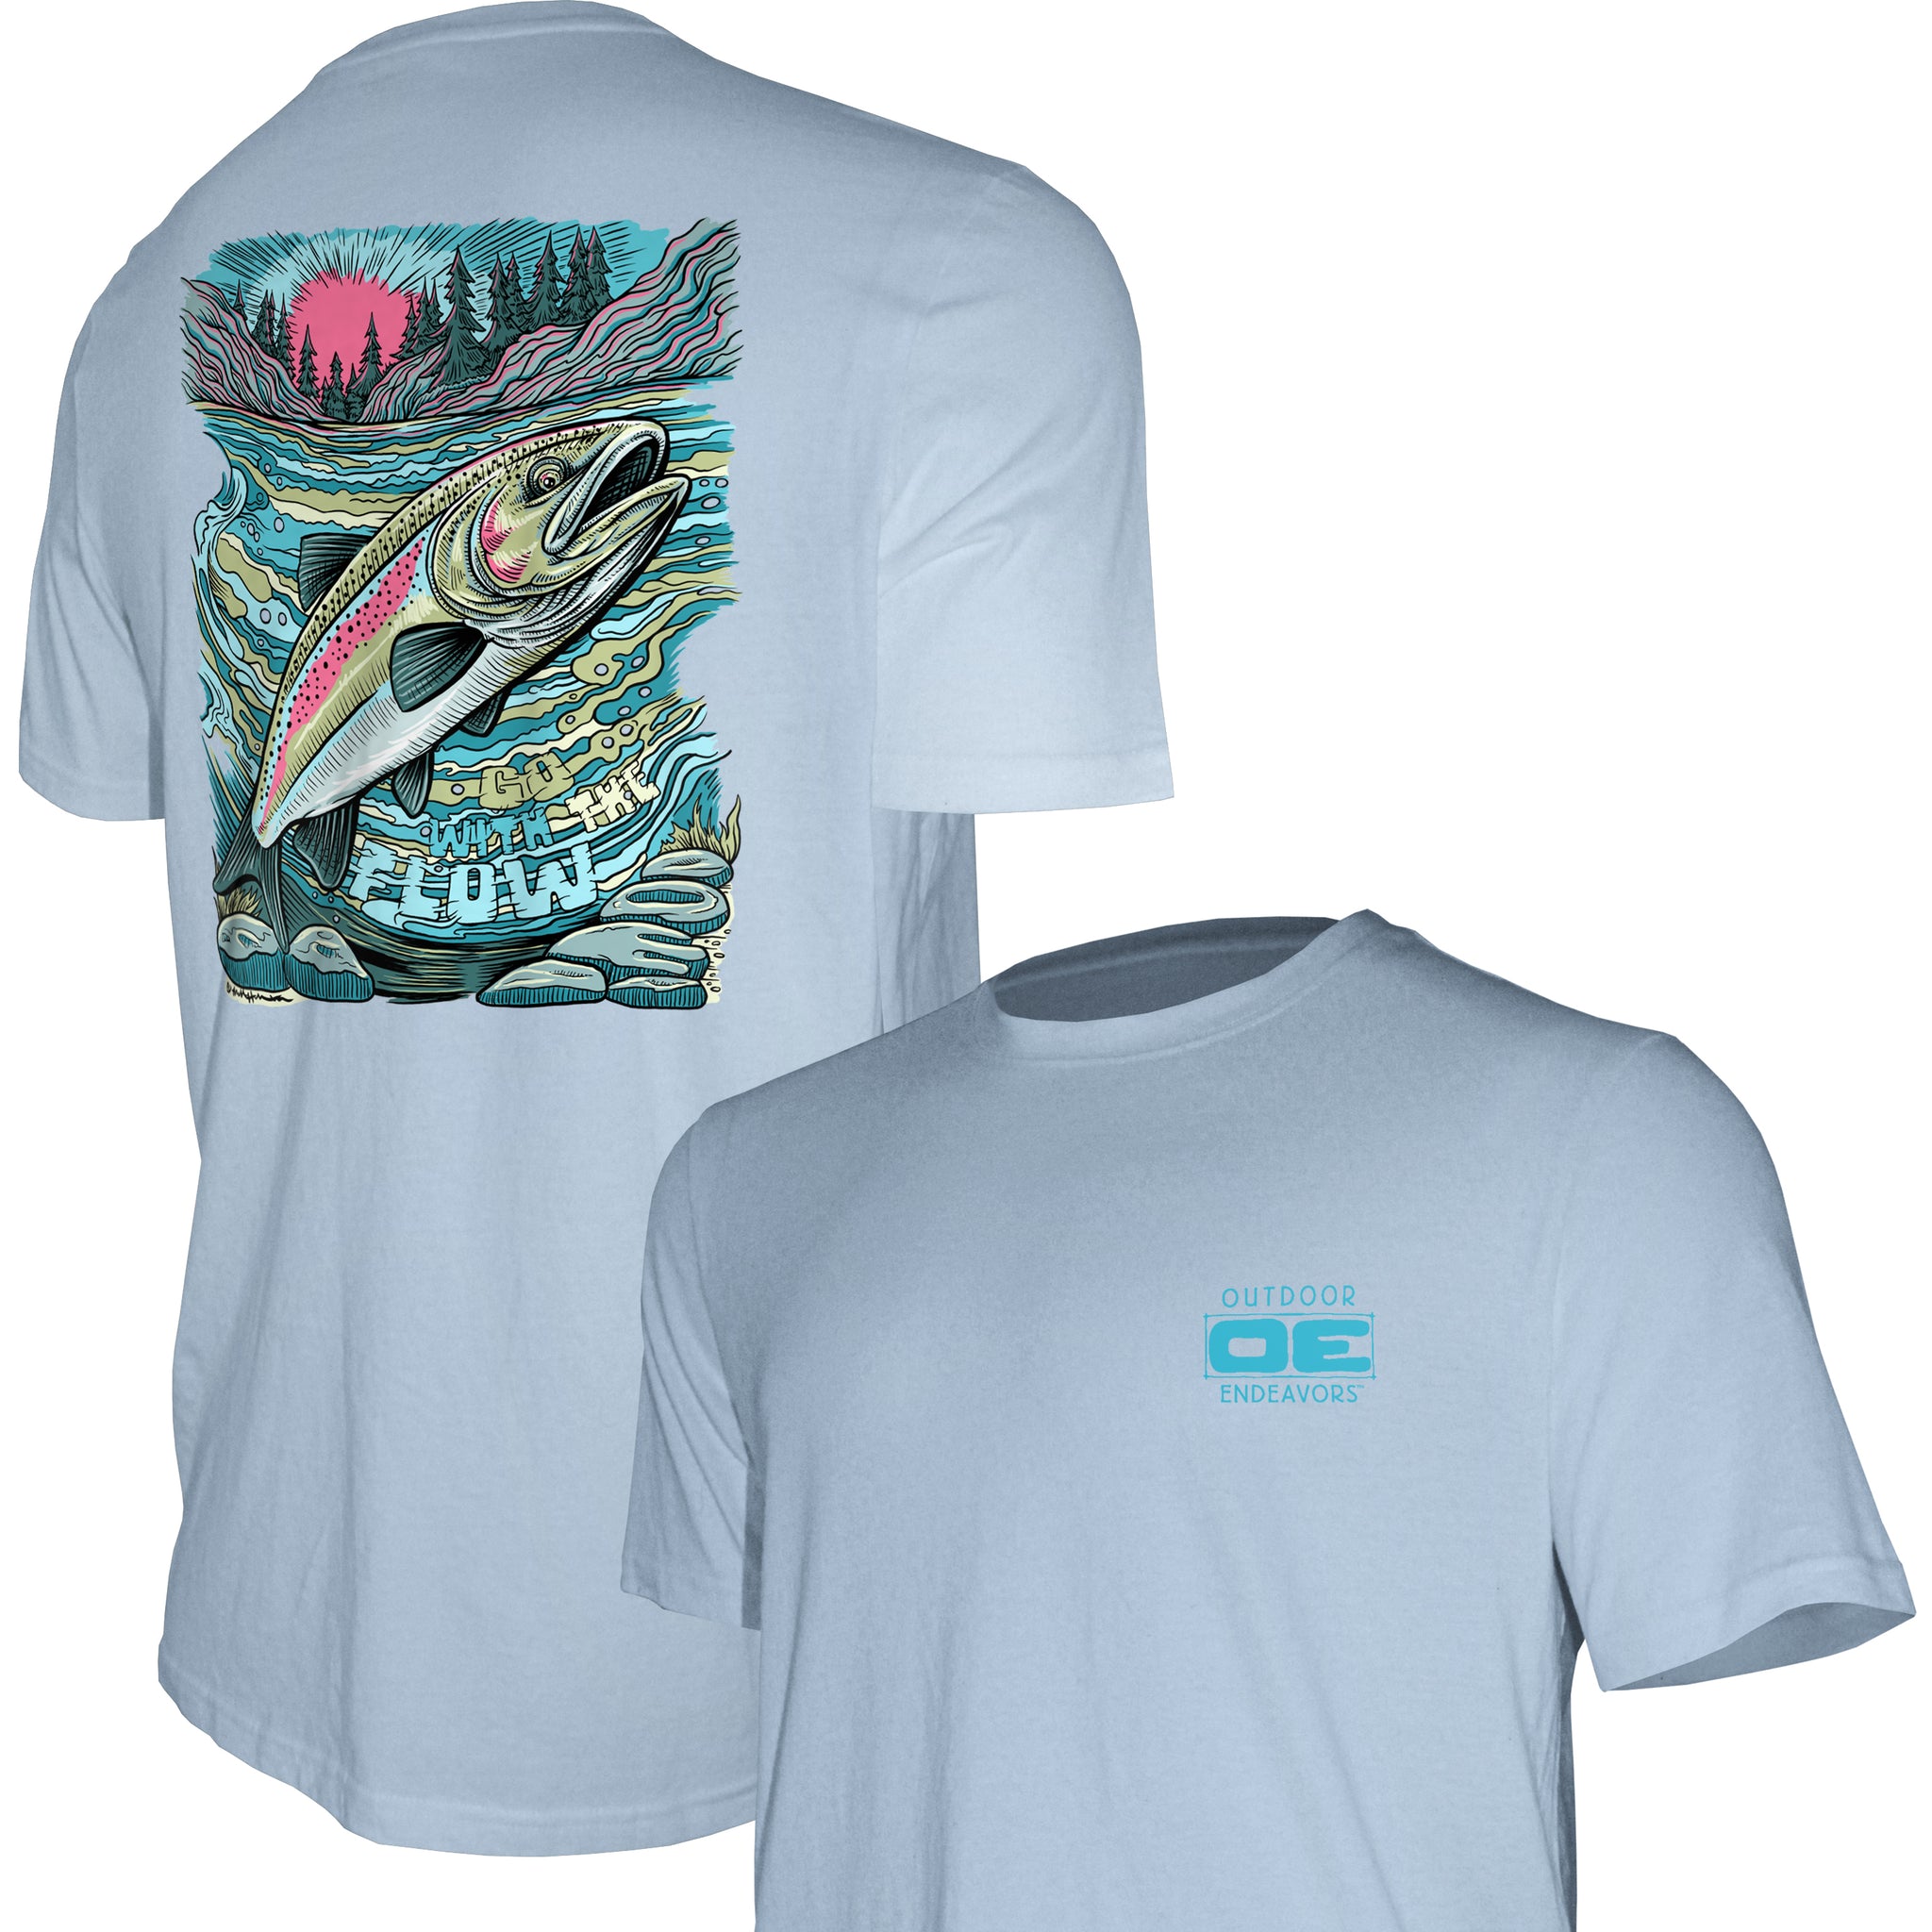 Outdoor Endeavors Out There- American Made Tee - The Flow